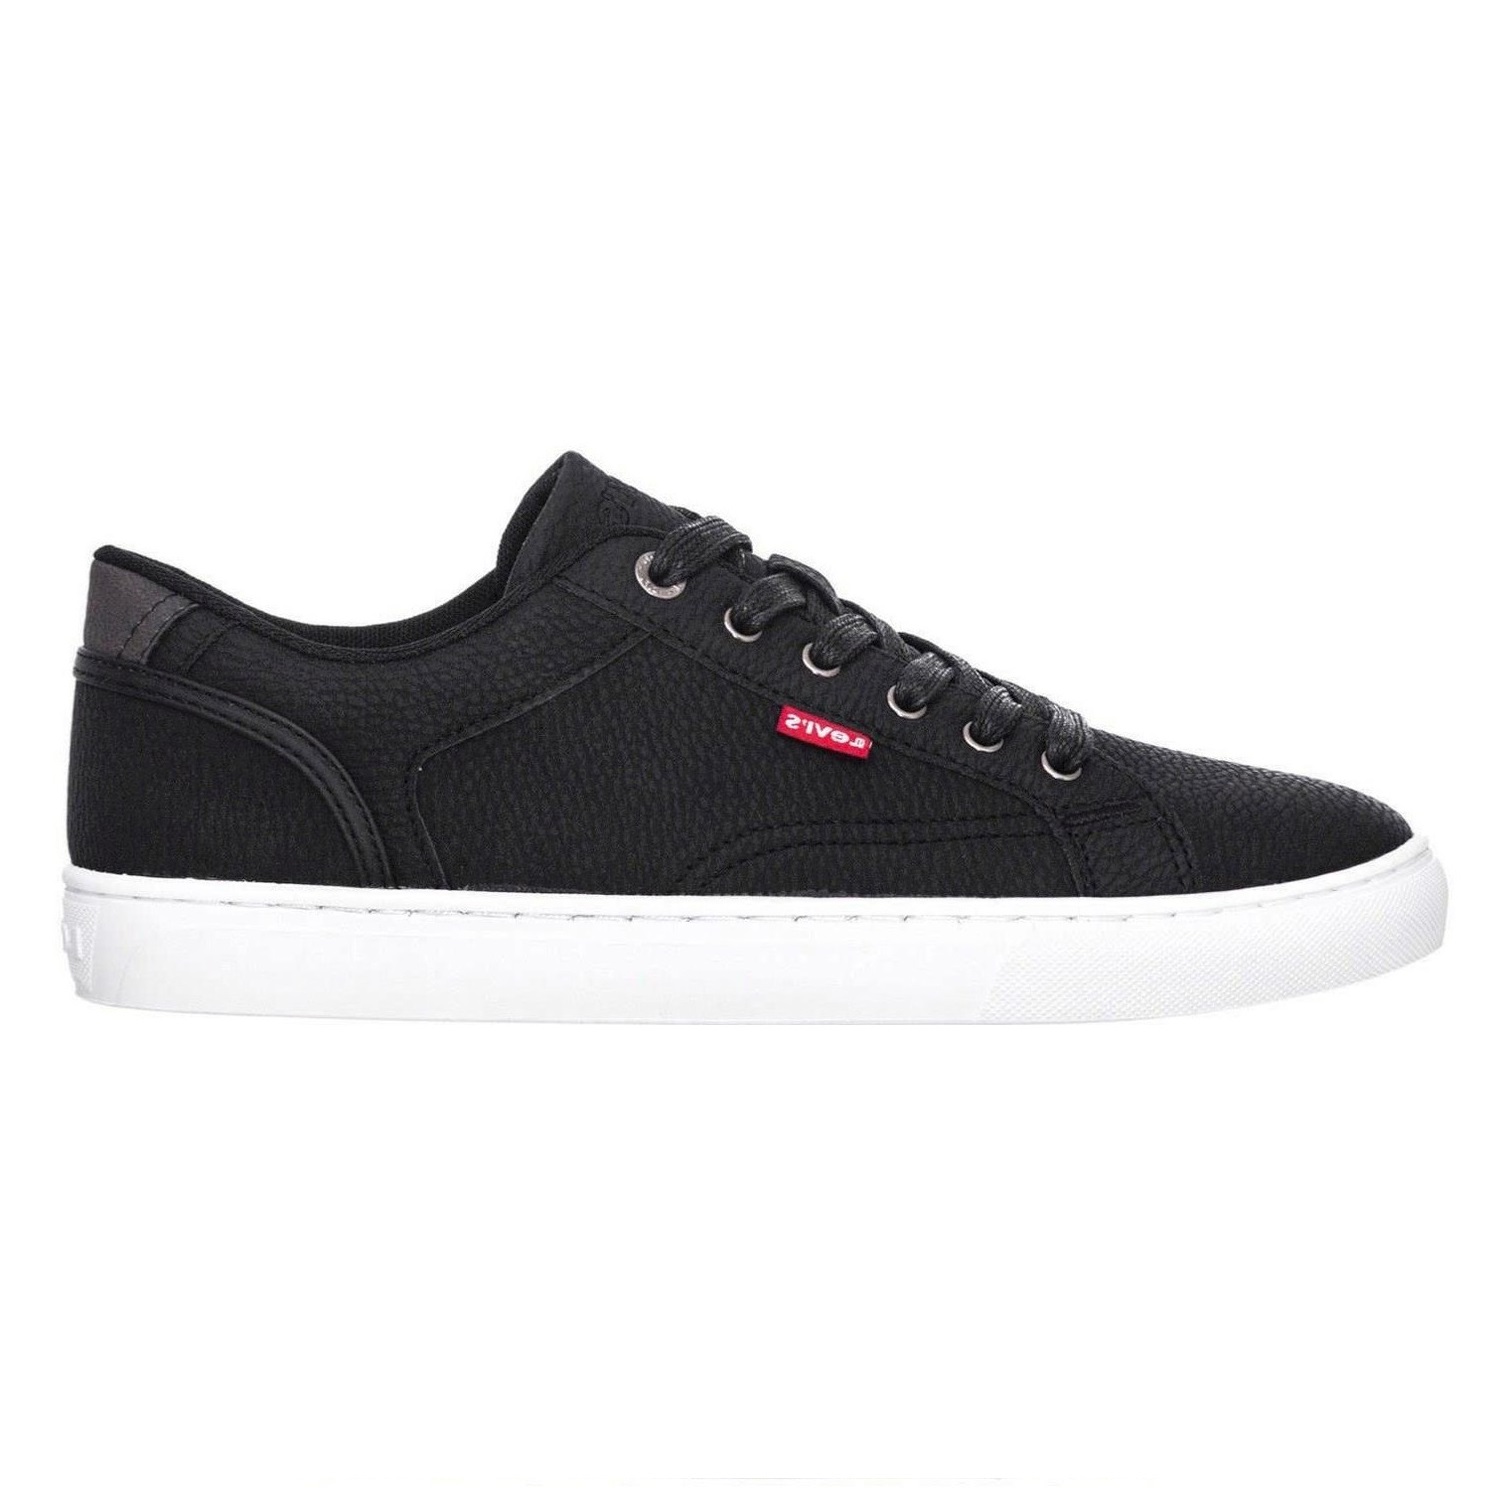 Levi's Courtright Ανδρικά Sneakers μαύρο  232805-794-59